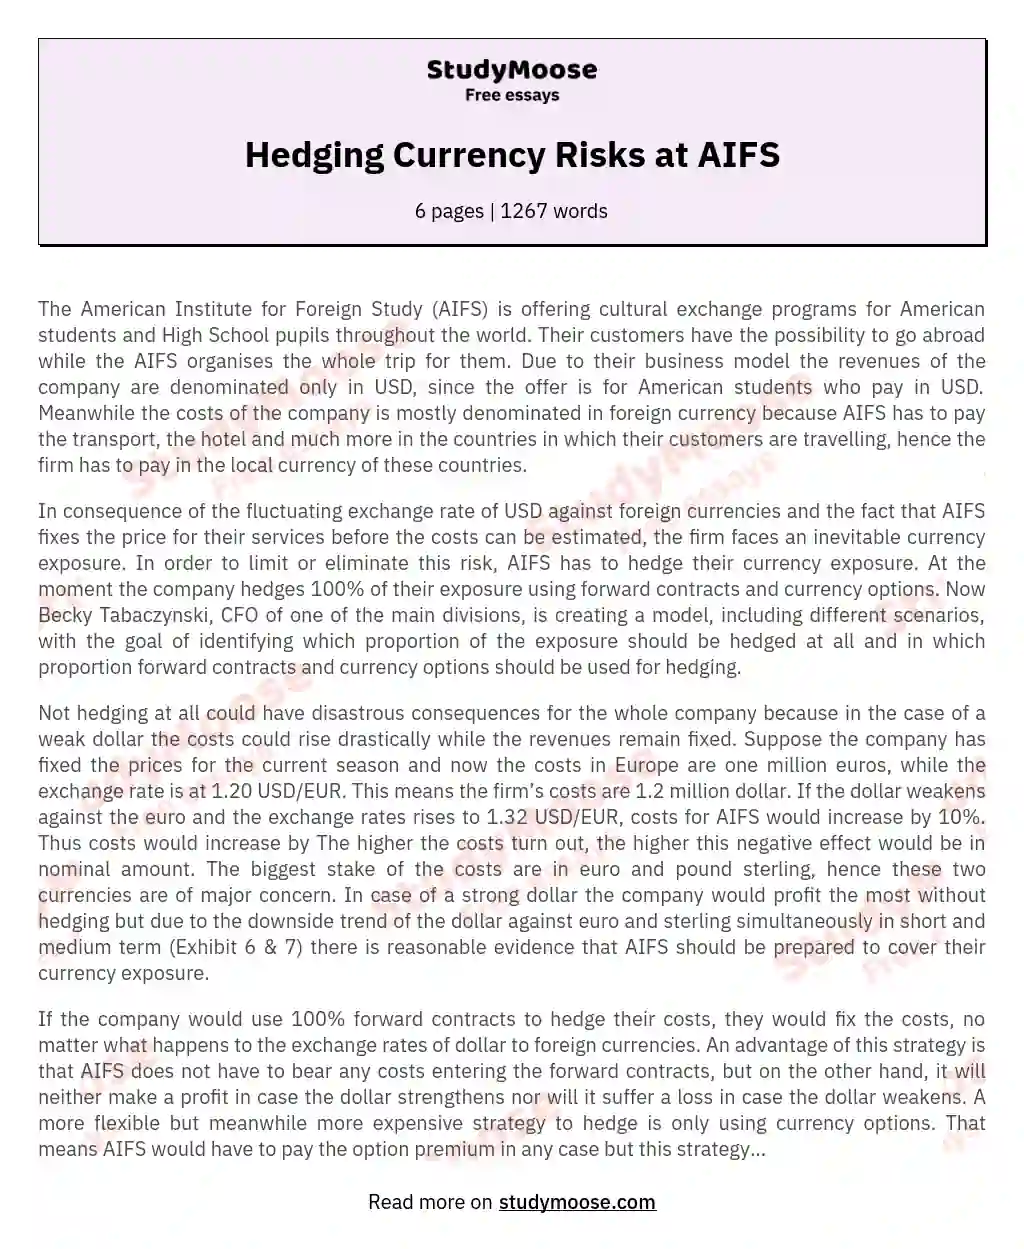 Hedging Currency Risks at AIFS essay